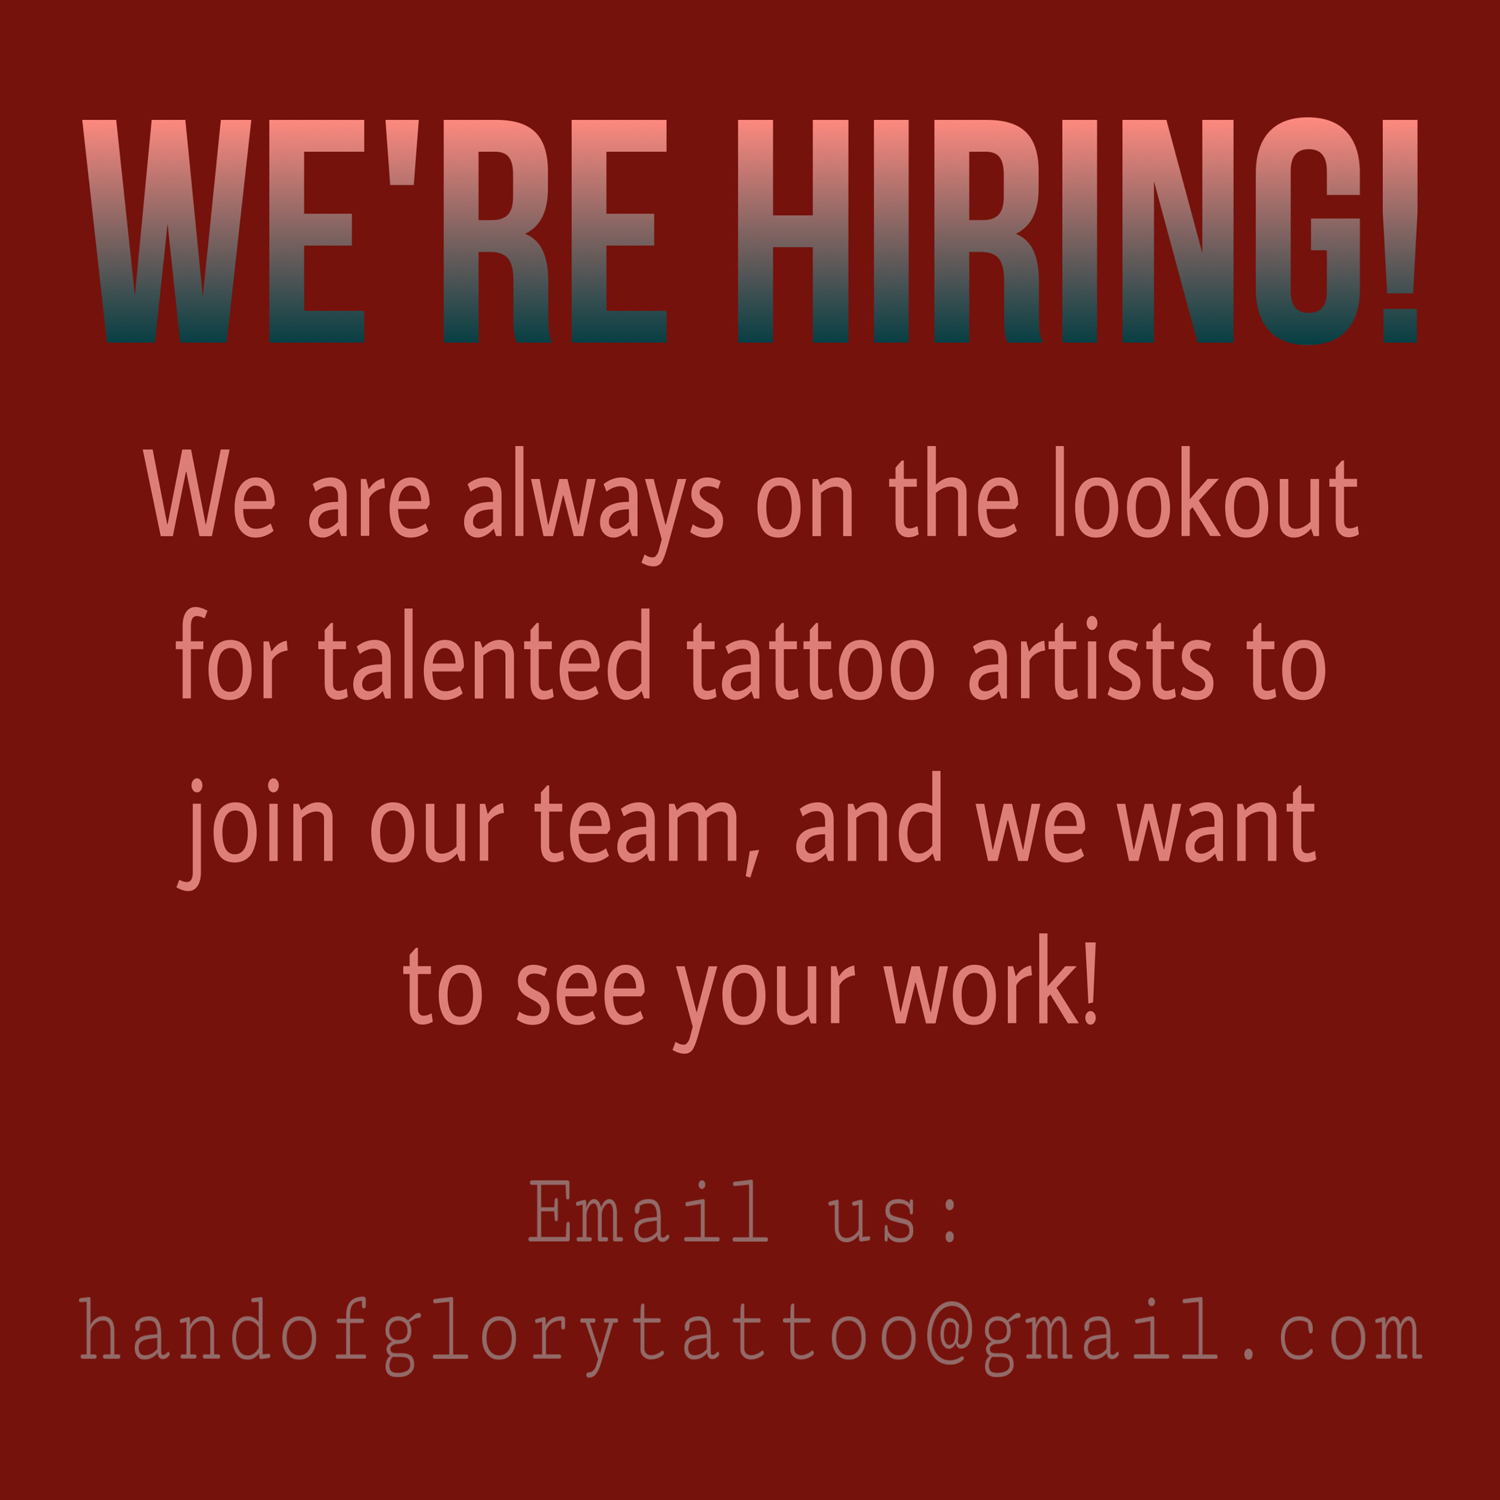 Tattoo Artist Wanted at Ink or Dye Studio - YouTube